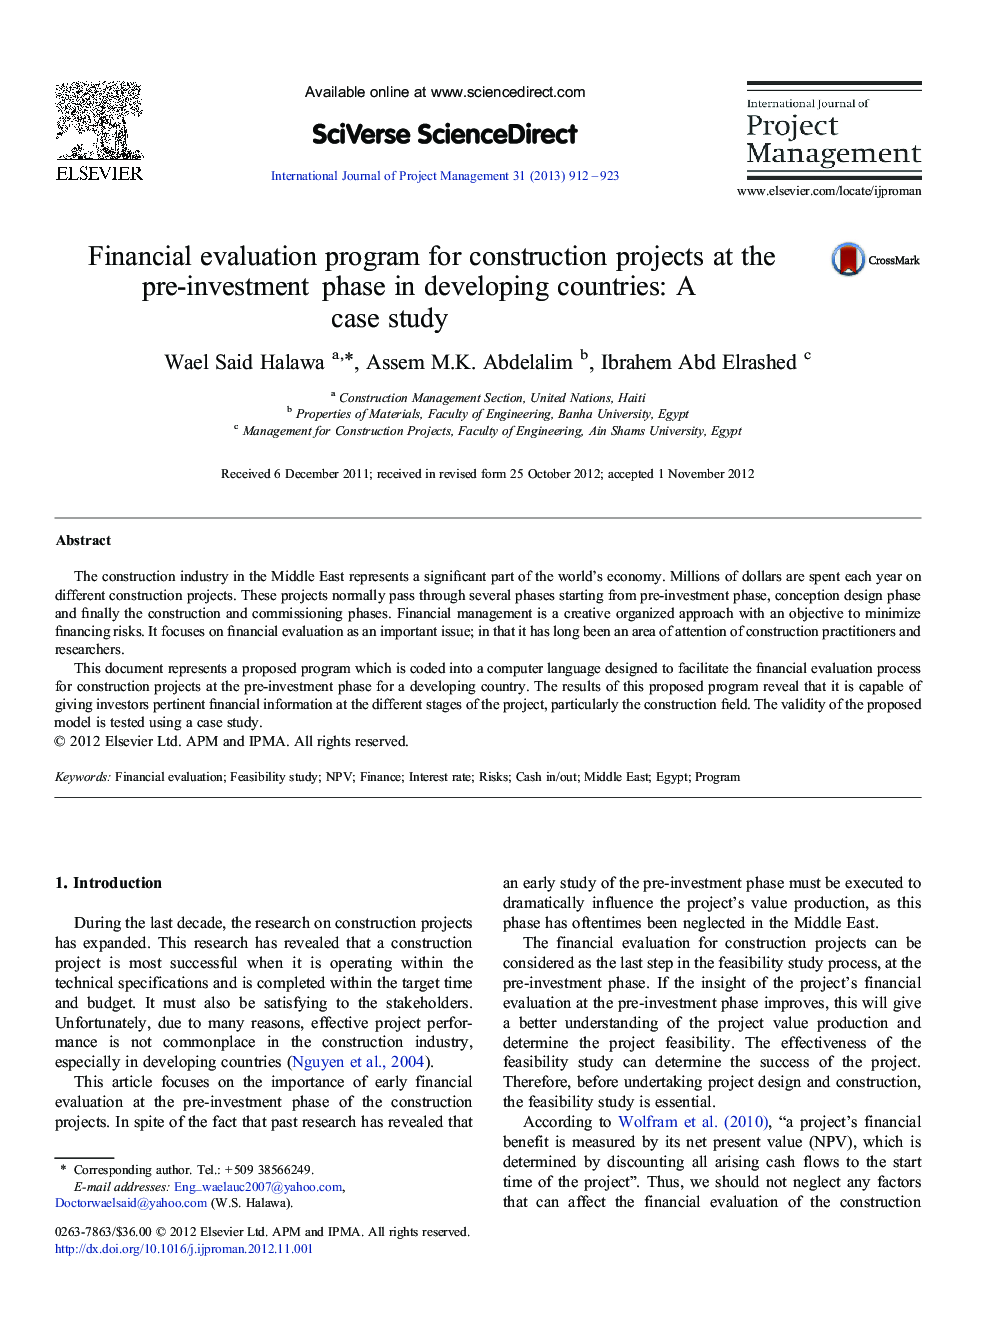 Financial evaluation program for construction projects at the pre-investment phase in developing countries: A case study